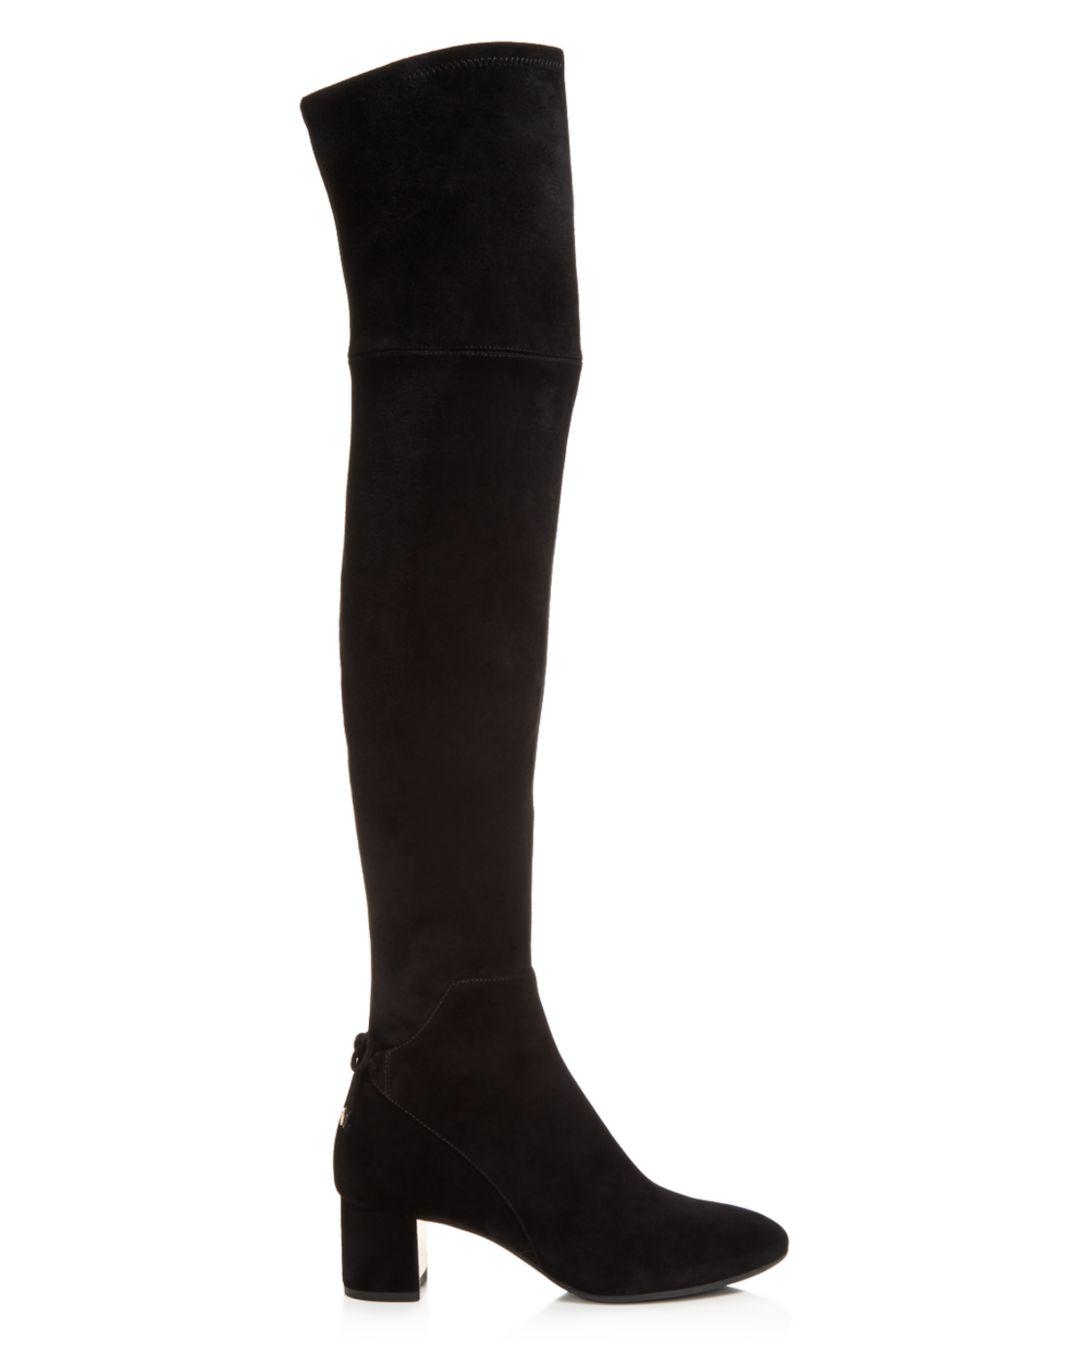 Tory Burch Women's Laila Suede Over-the-knee Boots in Carbon (Black) - Lyst